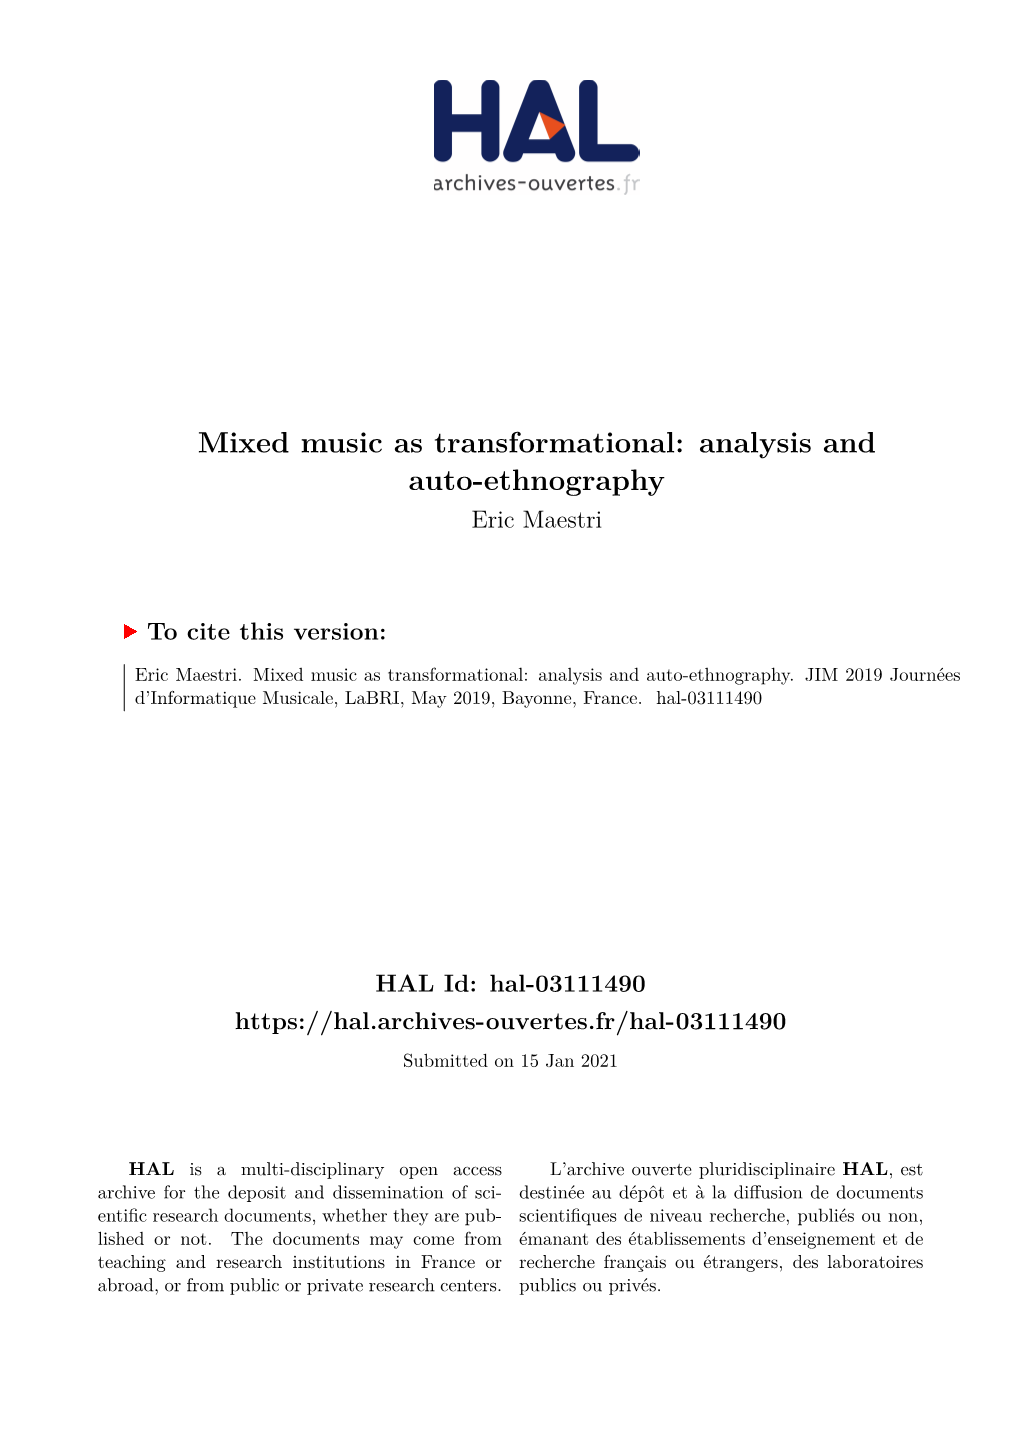 Mixed Music As Transformational: Analysis and Auto-Ethnography Eric Maestri